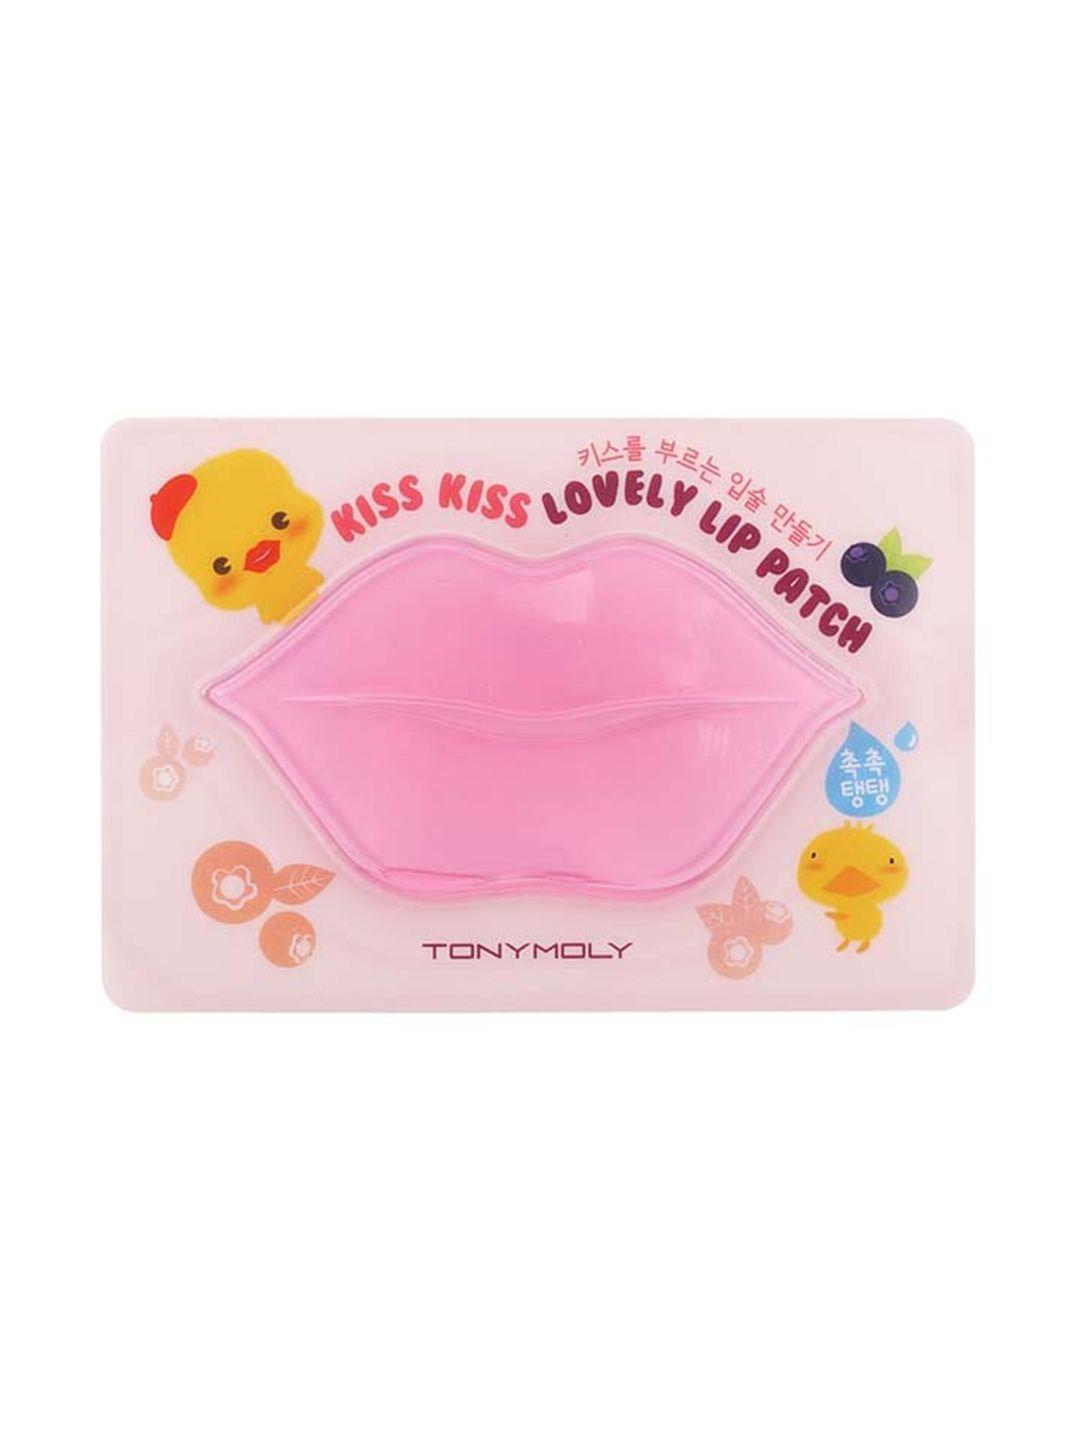 tonymoly hydrating kiss kiss lovely lip patch with vitamin c